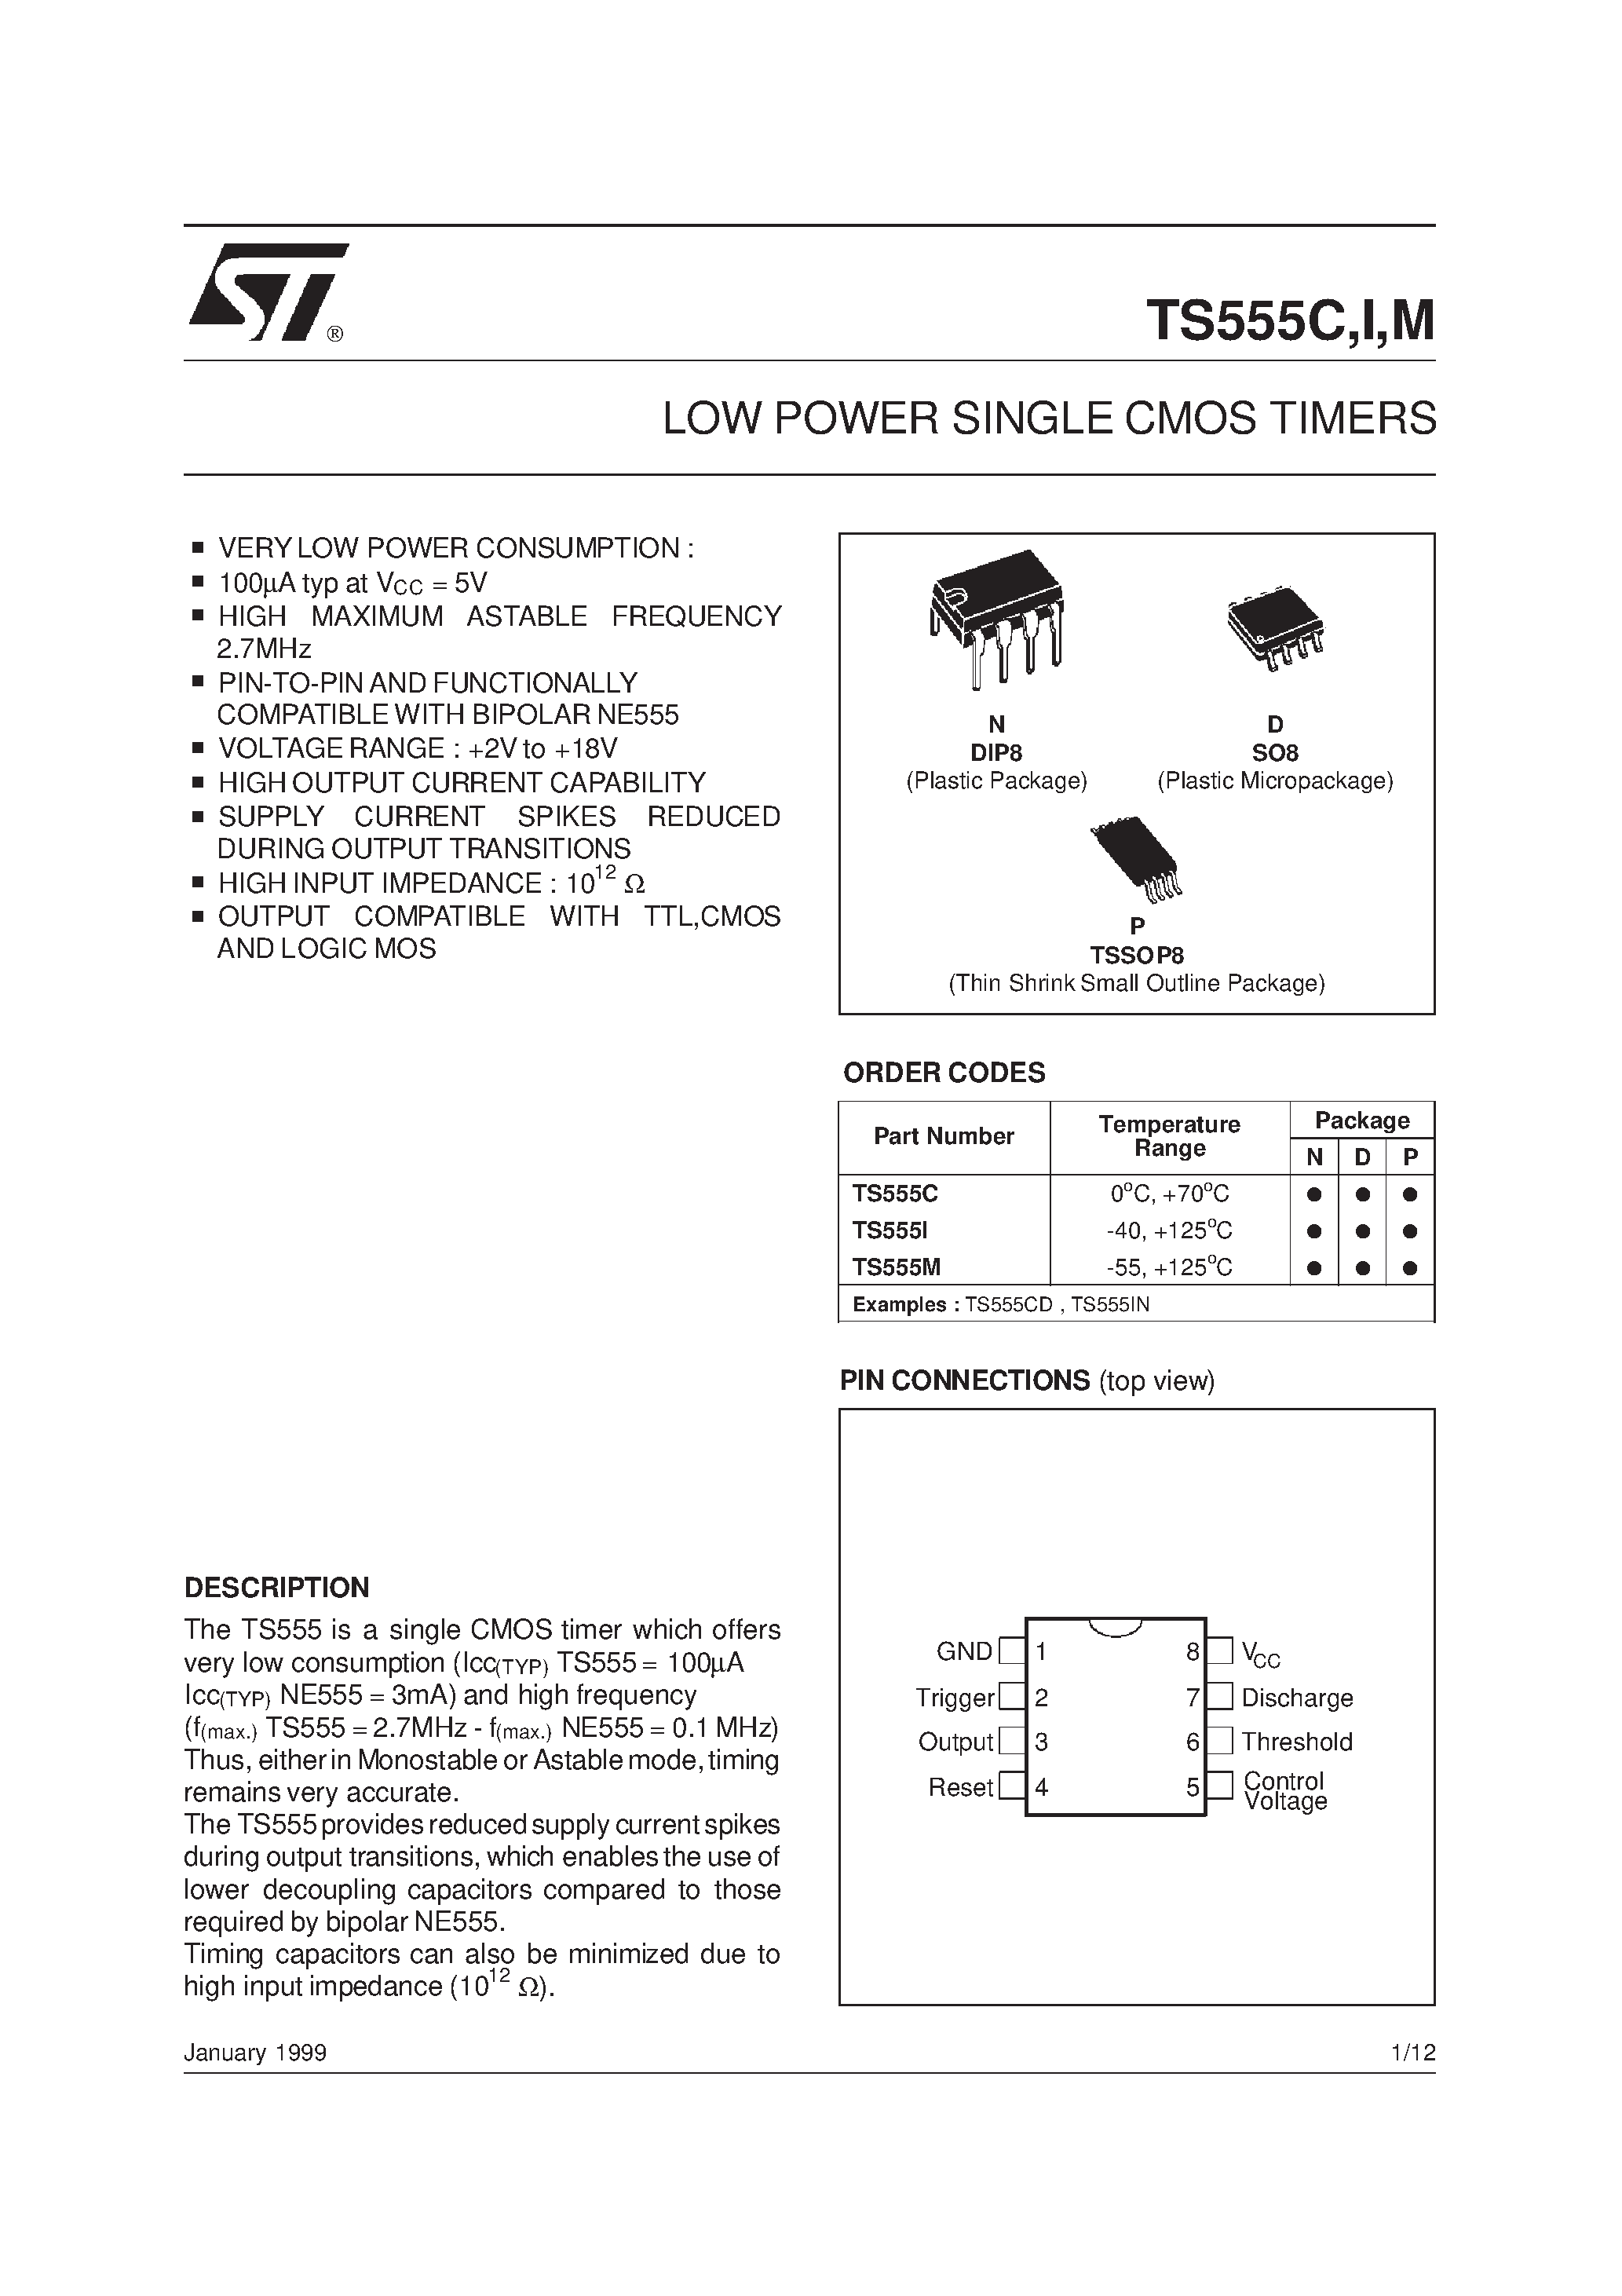 Datasheet TS555C - LOW POWER SINGLE CMOS TIMERS page 1